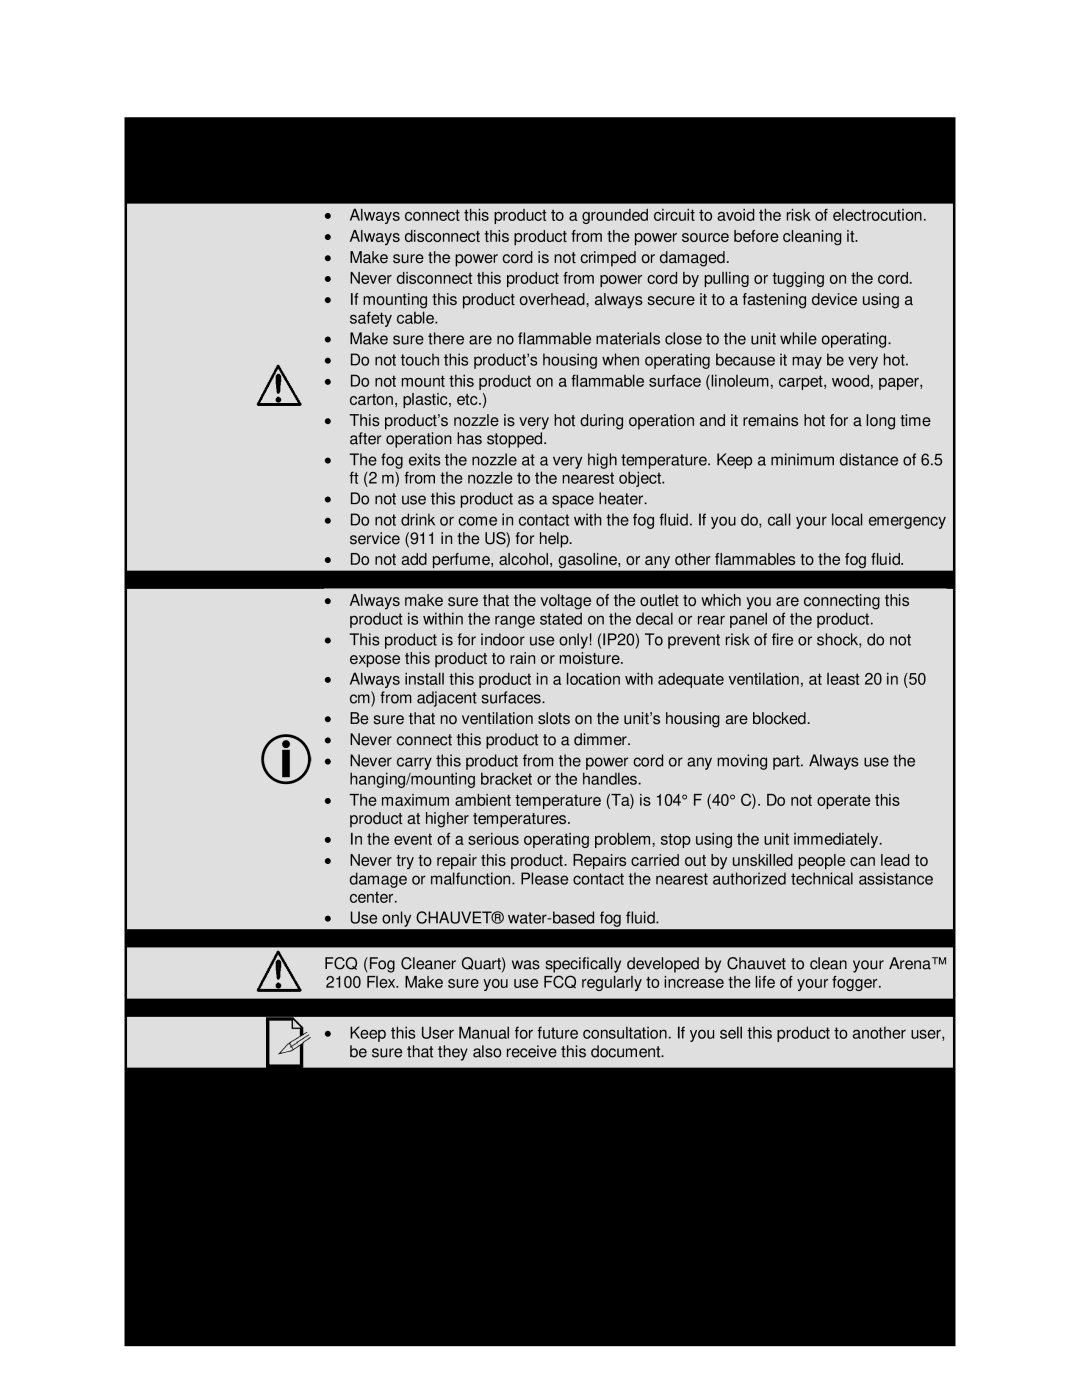 Chauvet 2100 user manual Safety Notes 